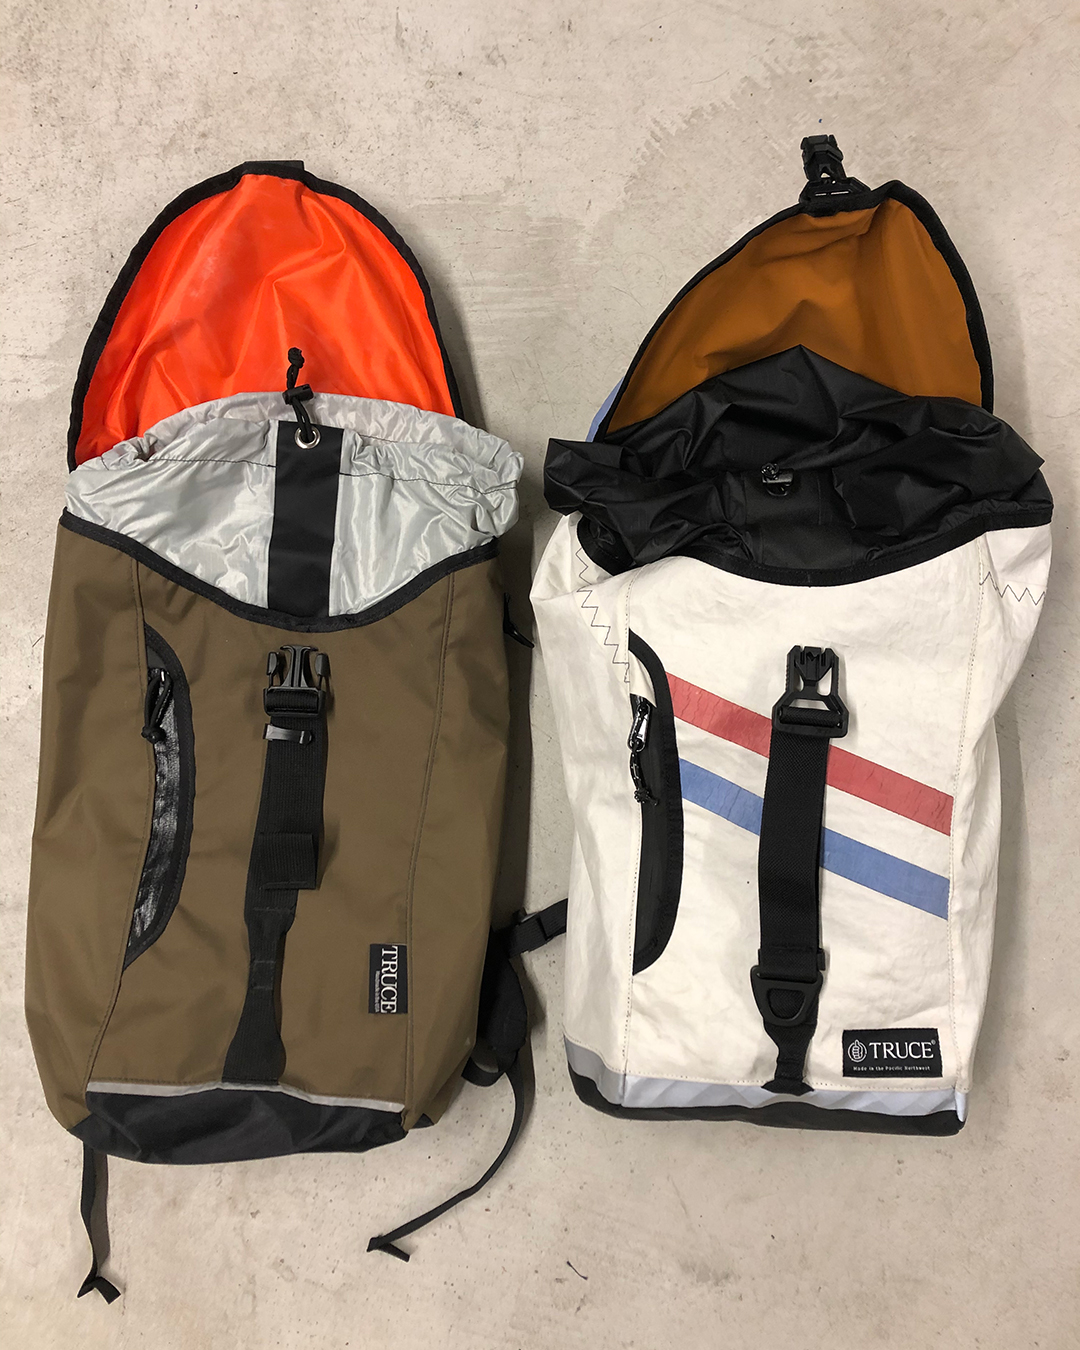 Upcycled Sailcloth Backpacks by Truce Designs | Field Mag